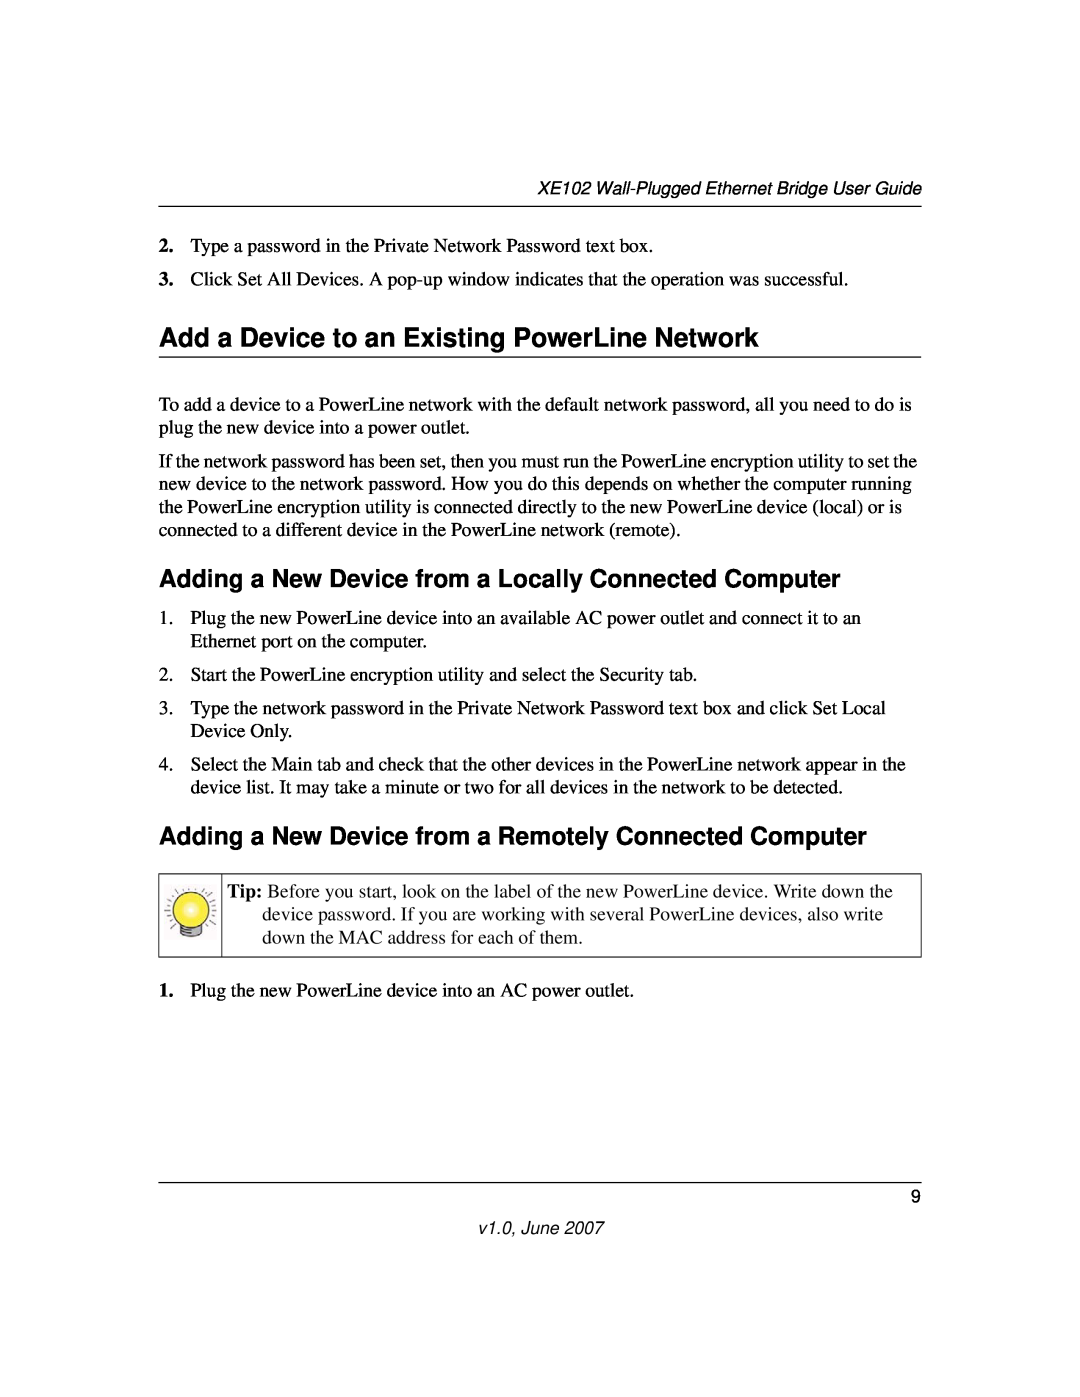 NETGEAR XE102 manual Add a Device to an Existing PowerLine Network, Adding a New Device from a Locally Connected Computer 